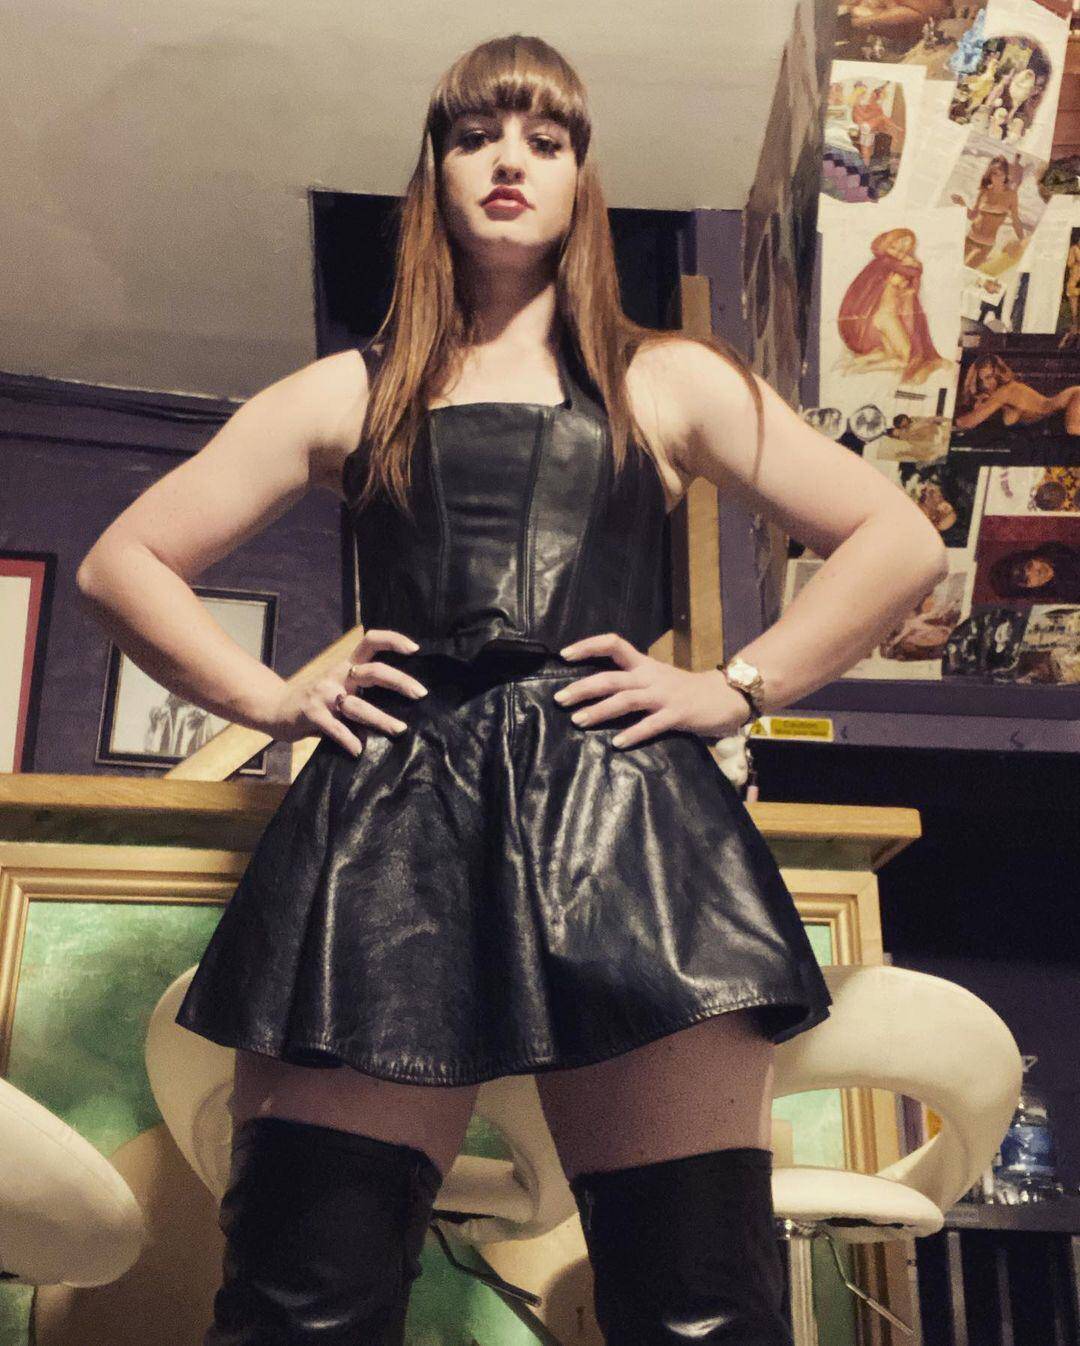 Would you like to become my submissive sissy,get ferminized,cross dress ...